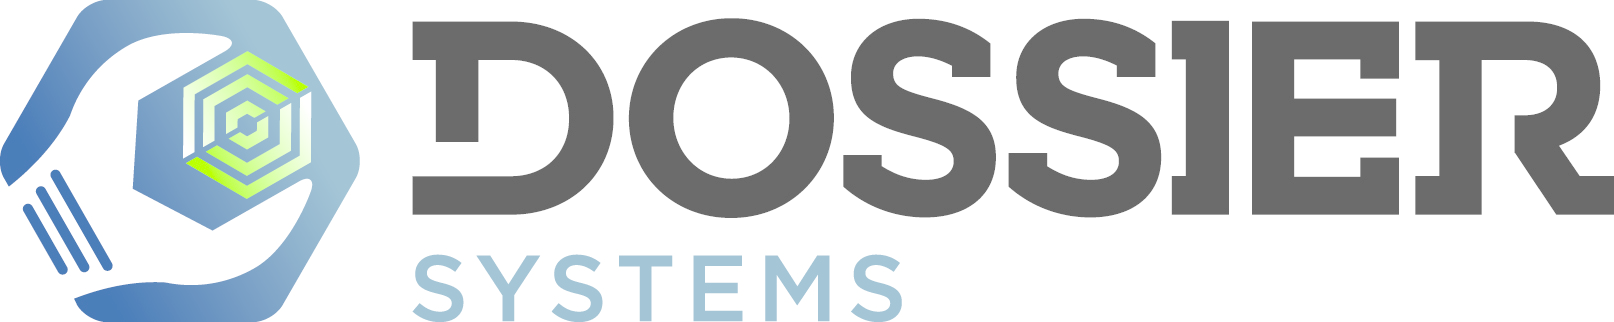 dossier systems